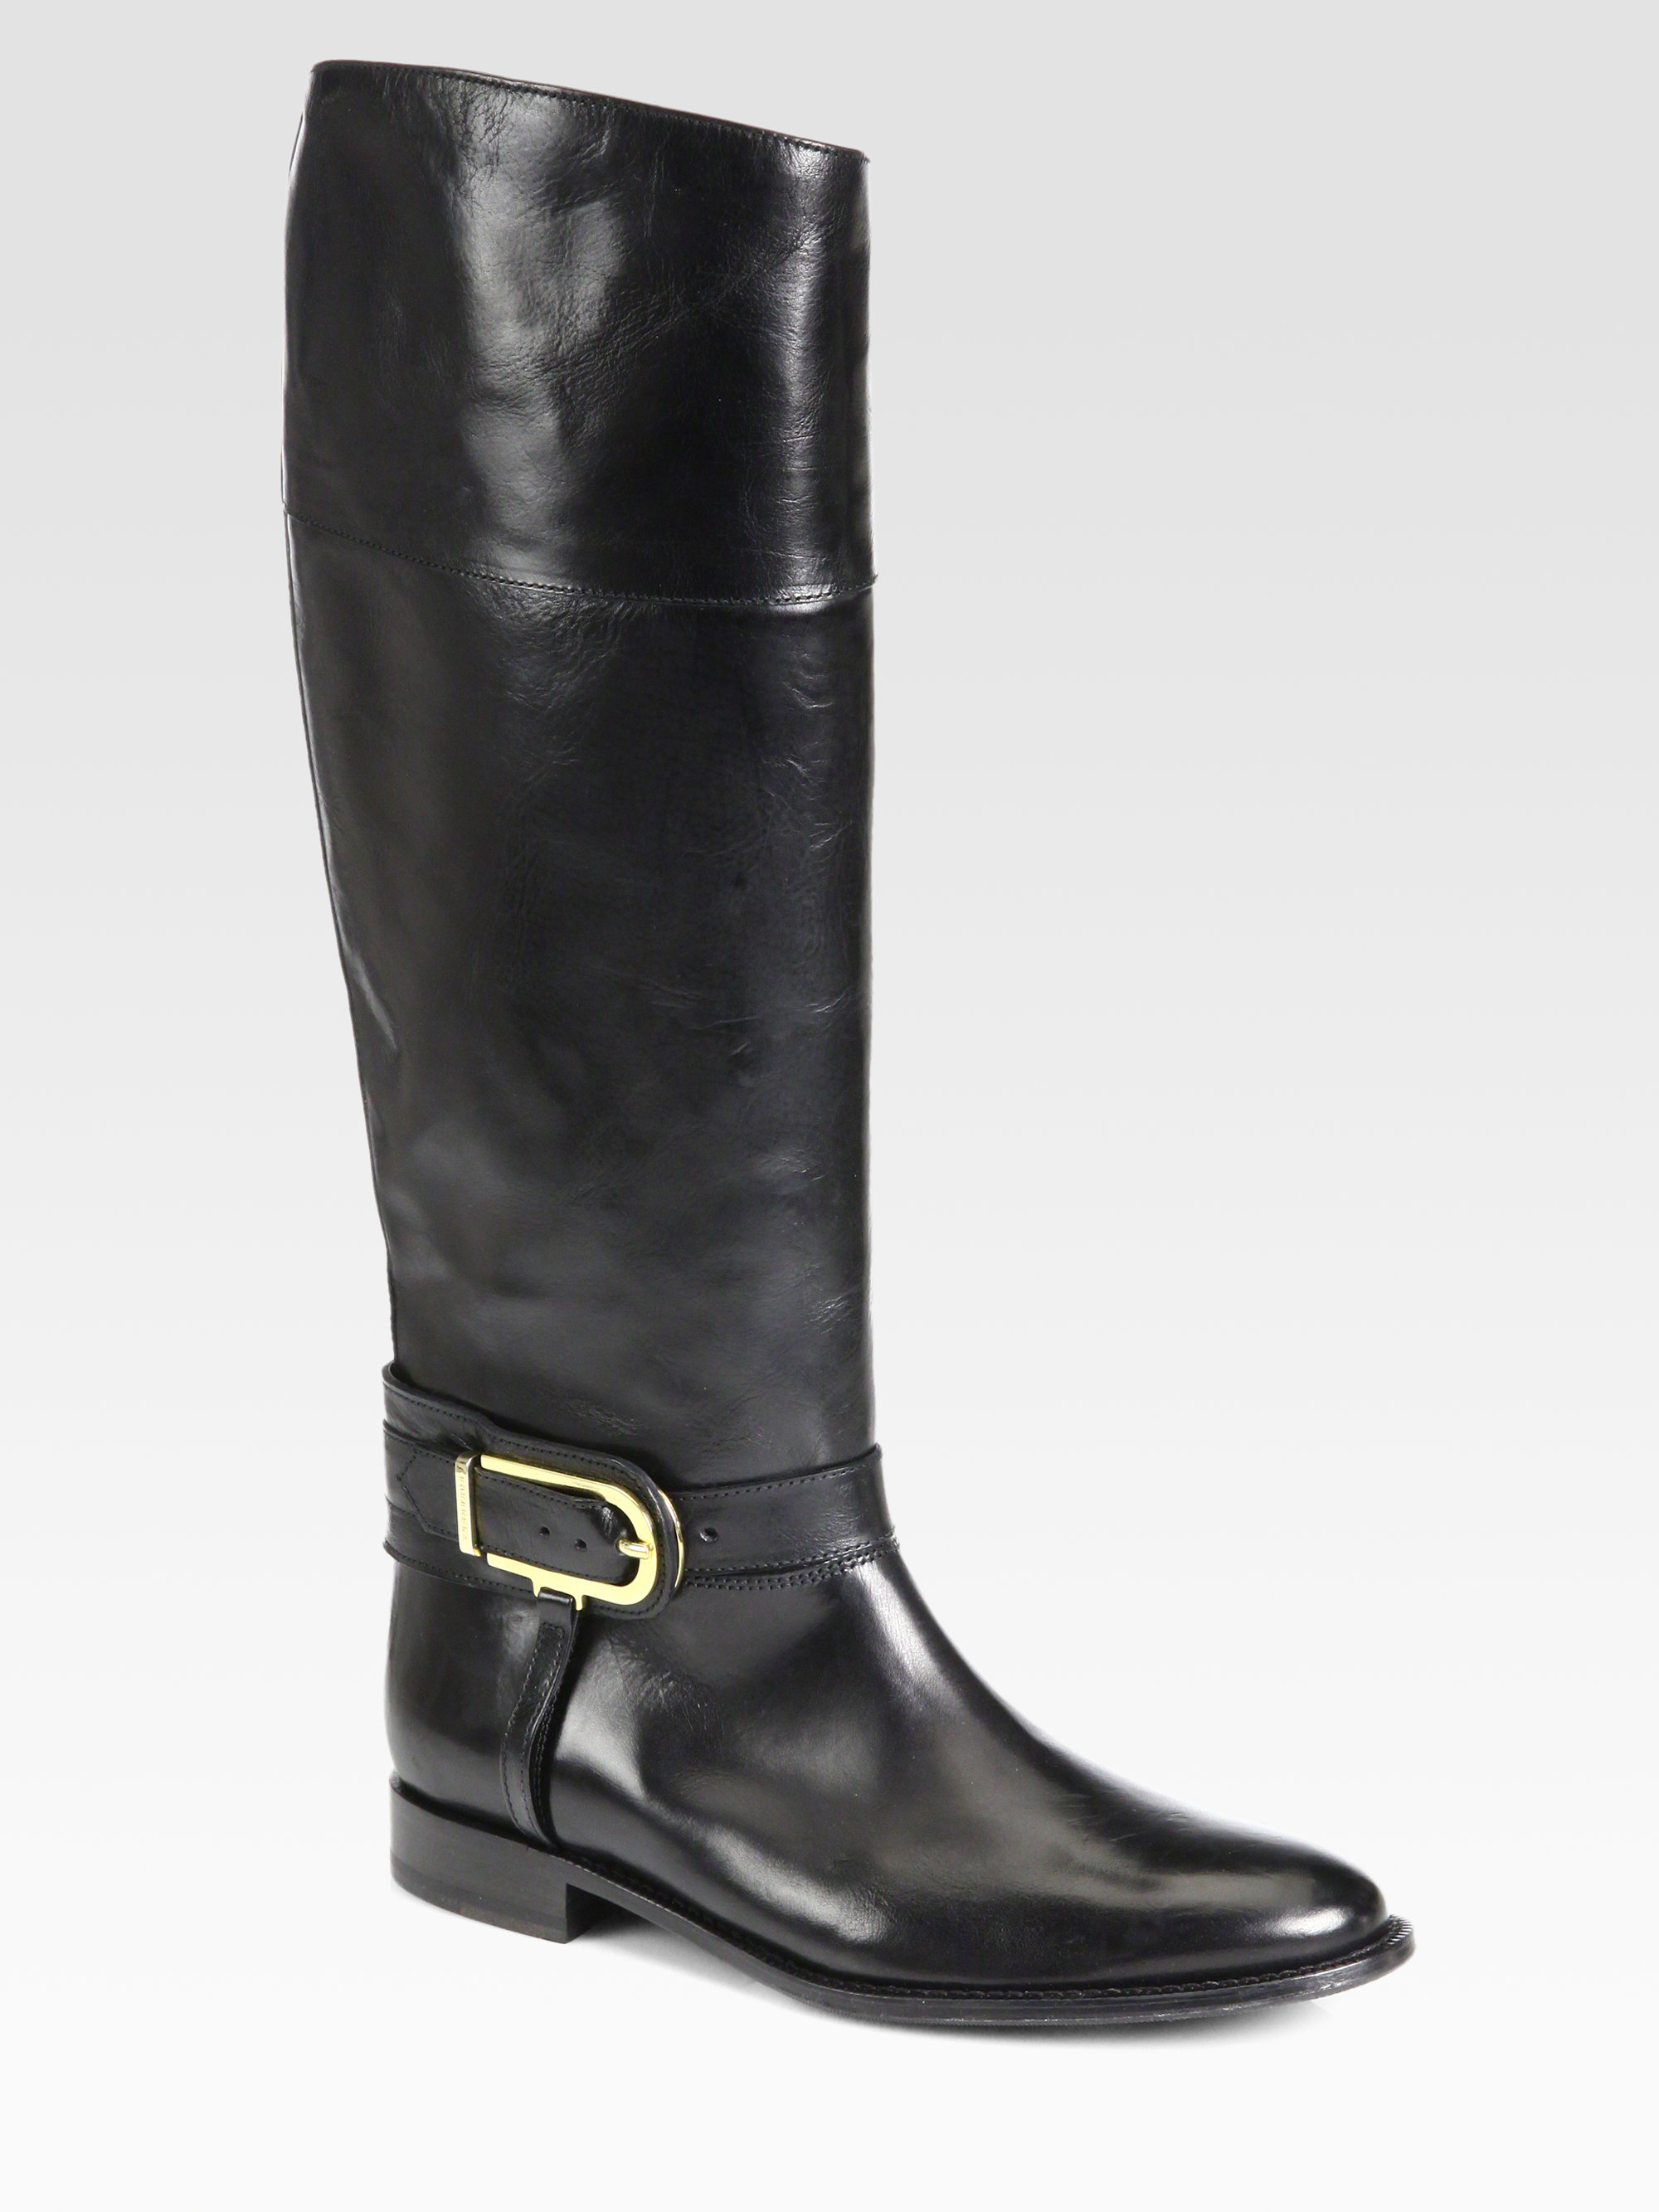 Burberry Winton Leather Riding Boots in Black | Lyst